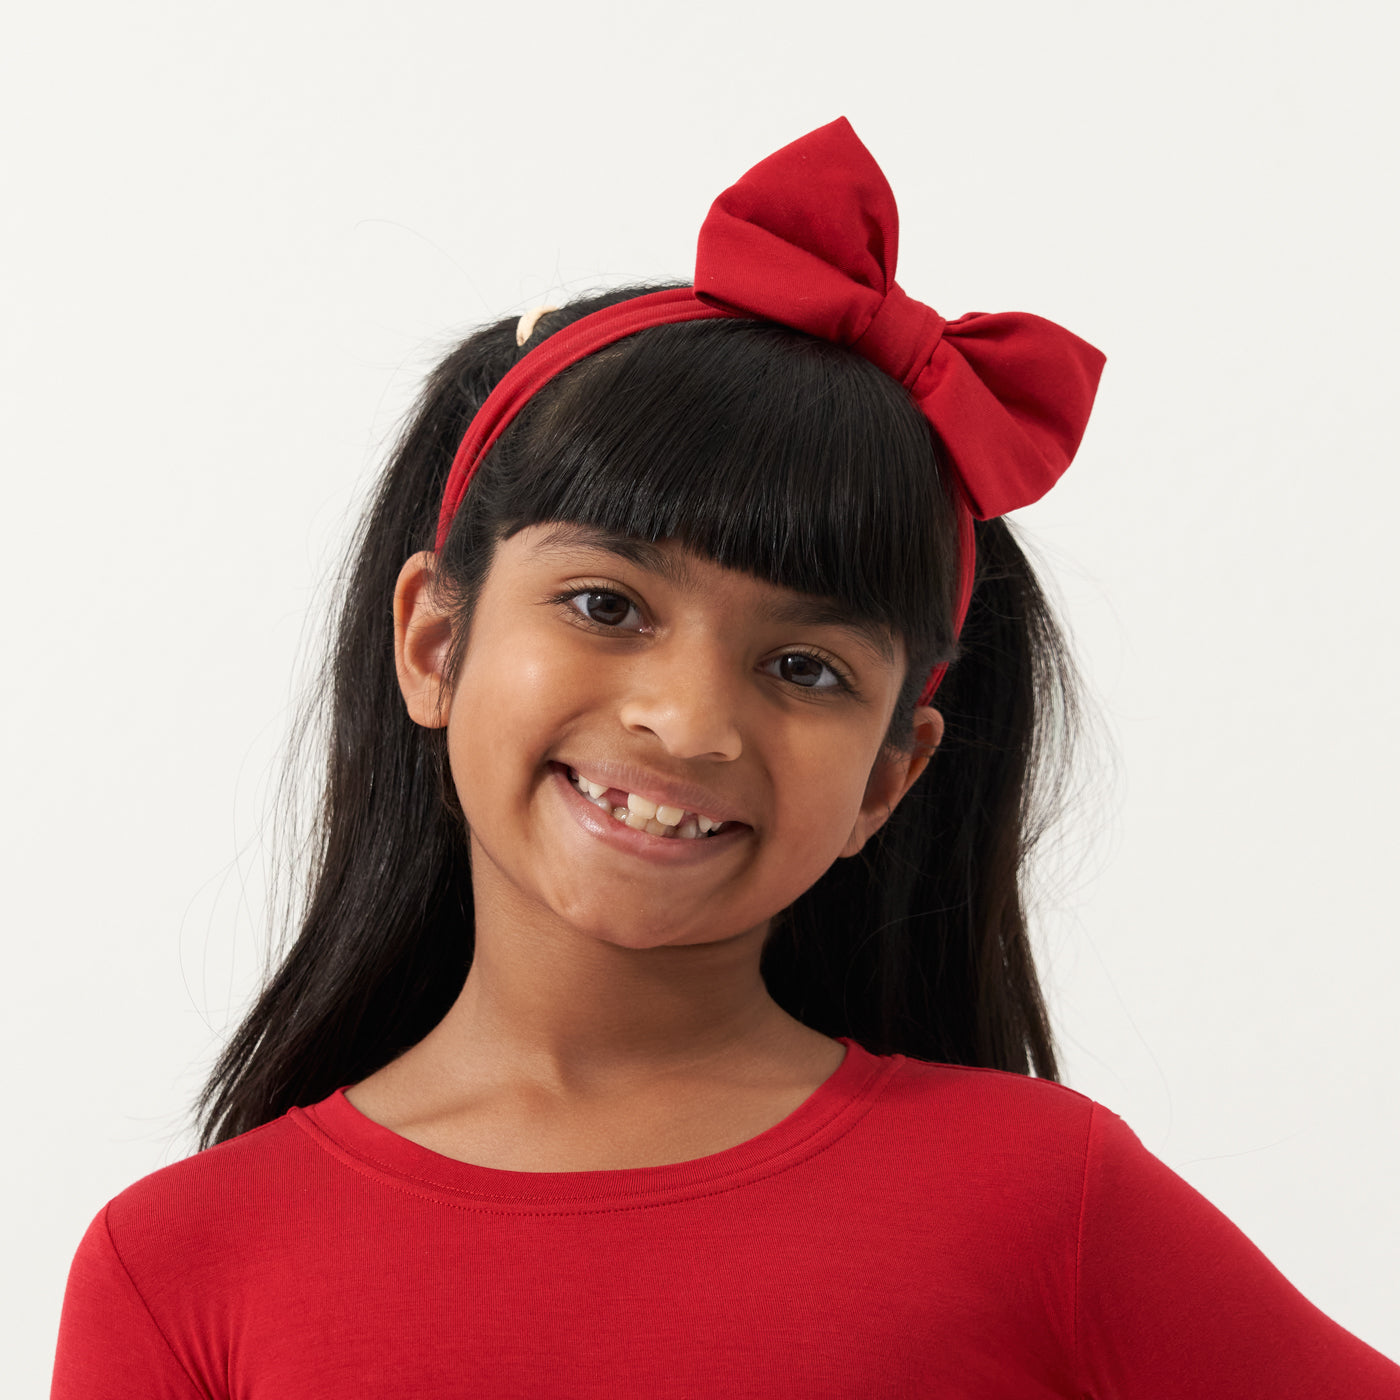 Child wearing a Holiday Red luxe bow headband and matching pajamas